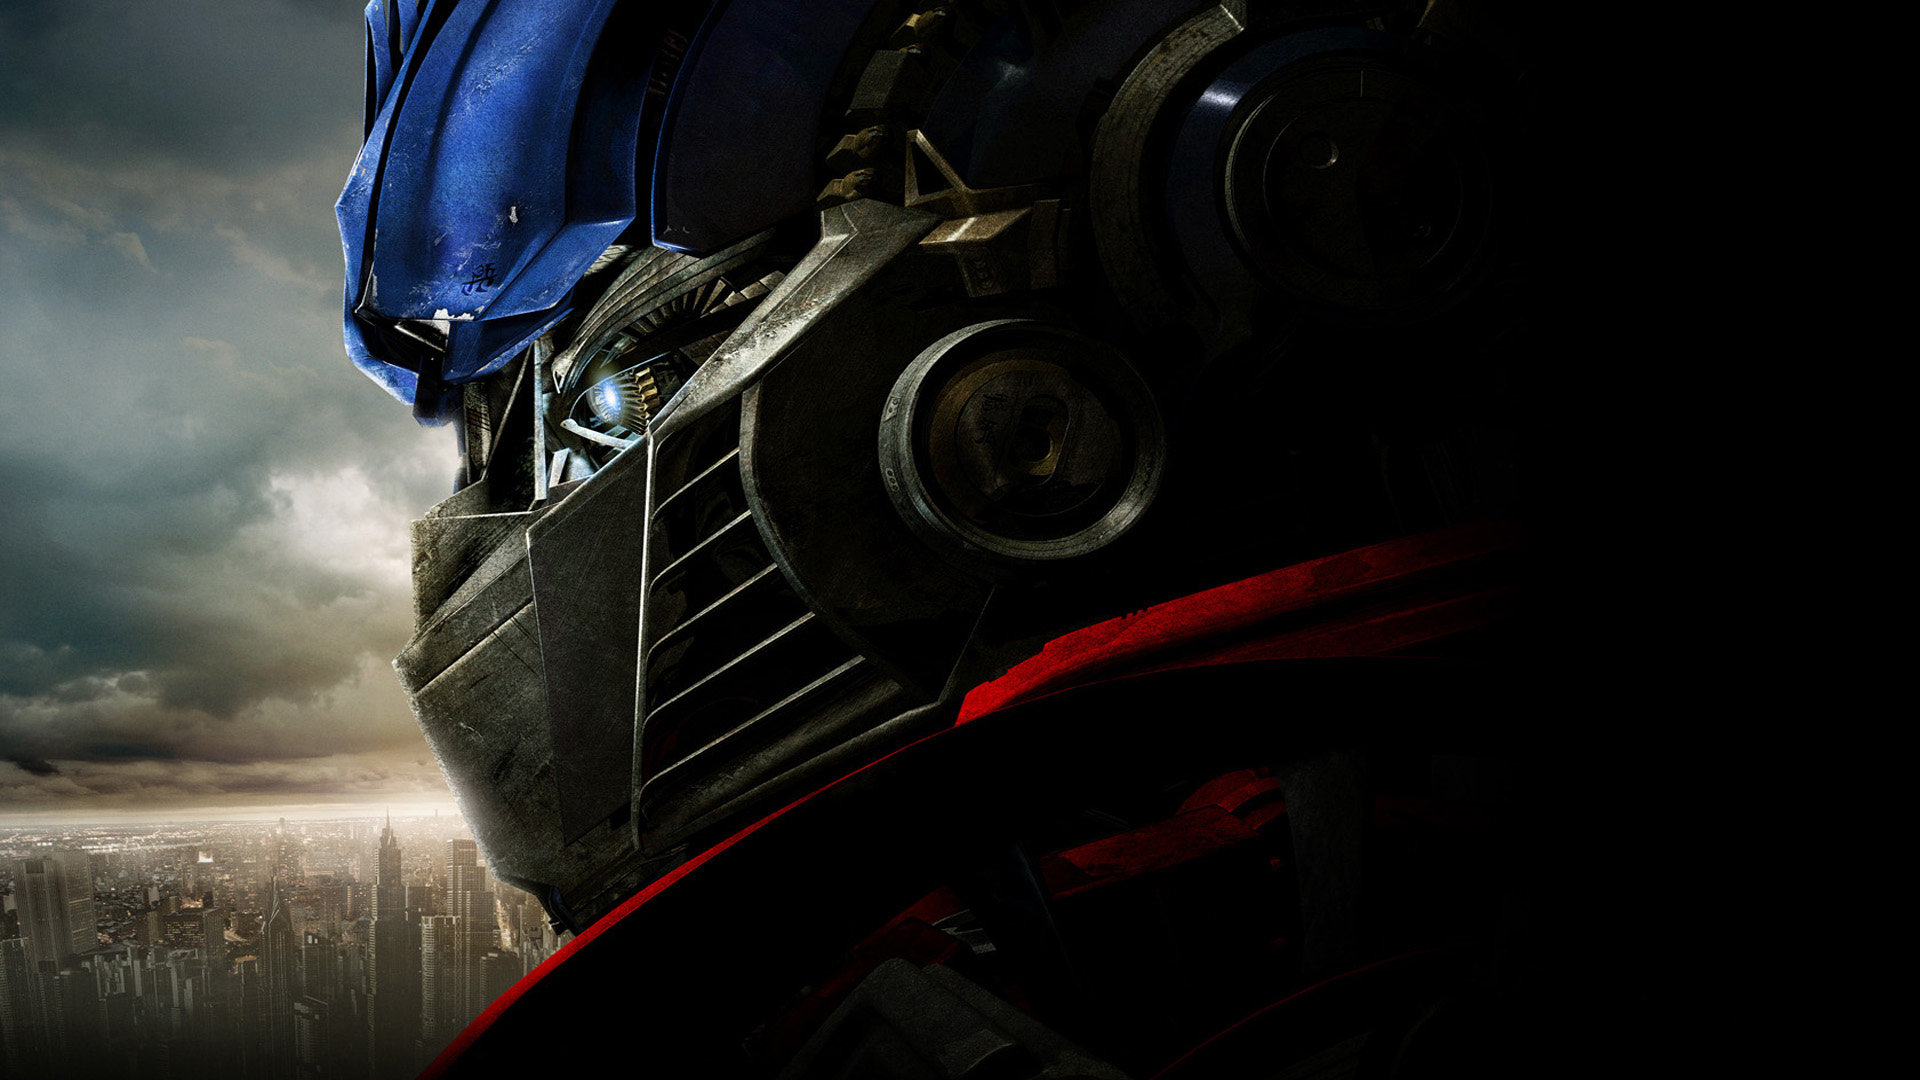 Download full hd 1920x1080 Transformers desktop background ID:375244 for free